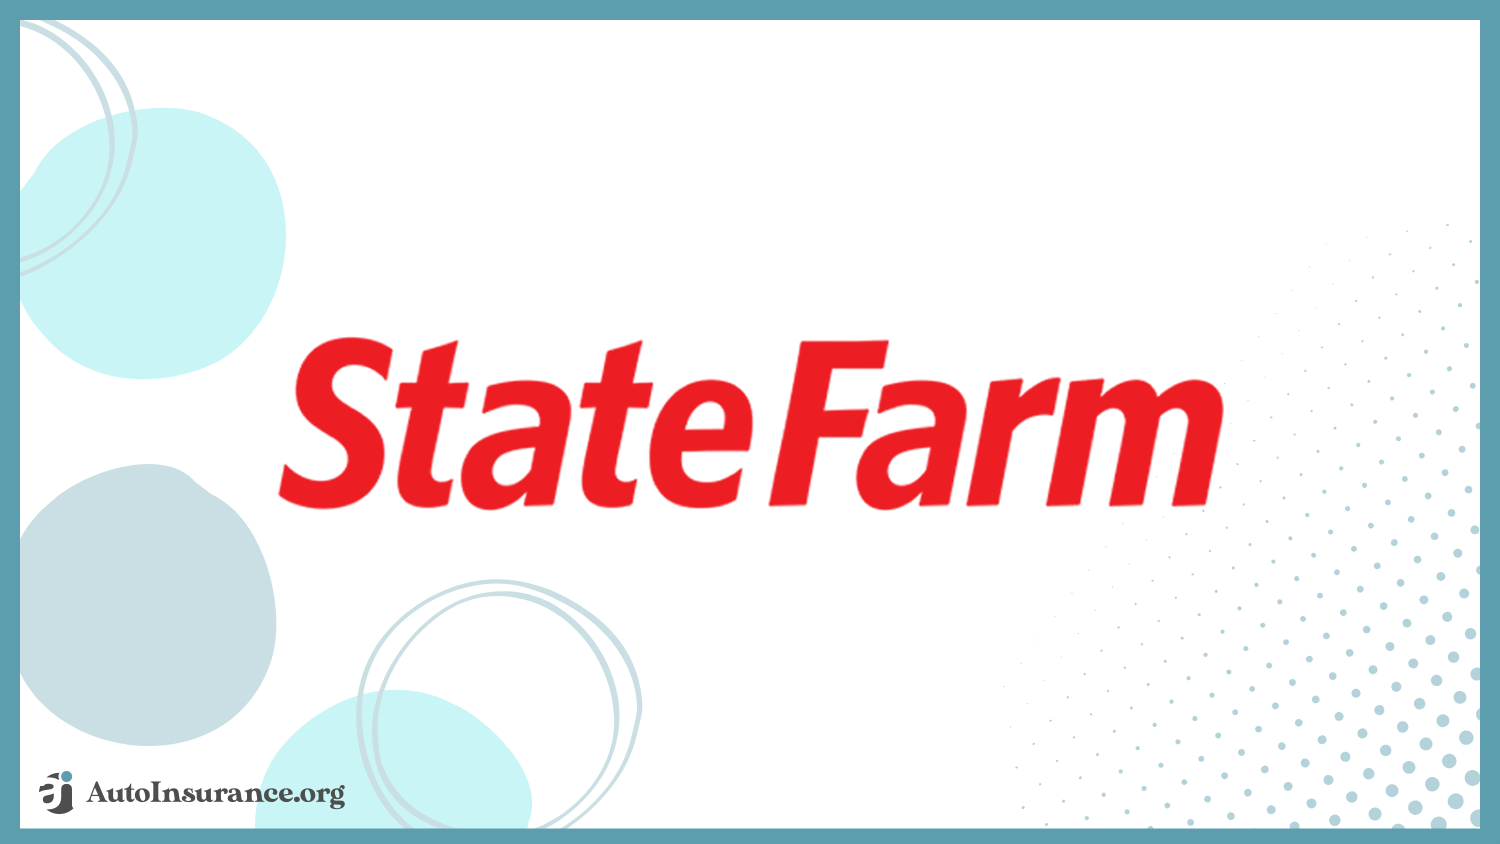 auto insurance companies with the best customer service: State Farm